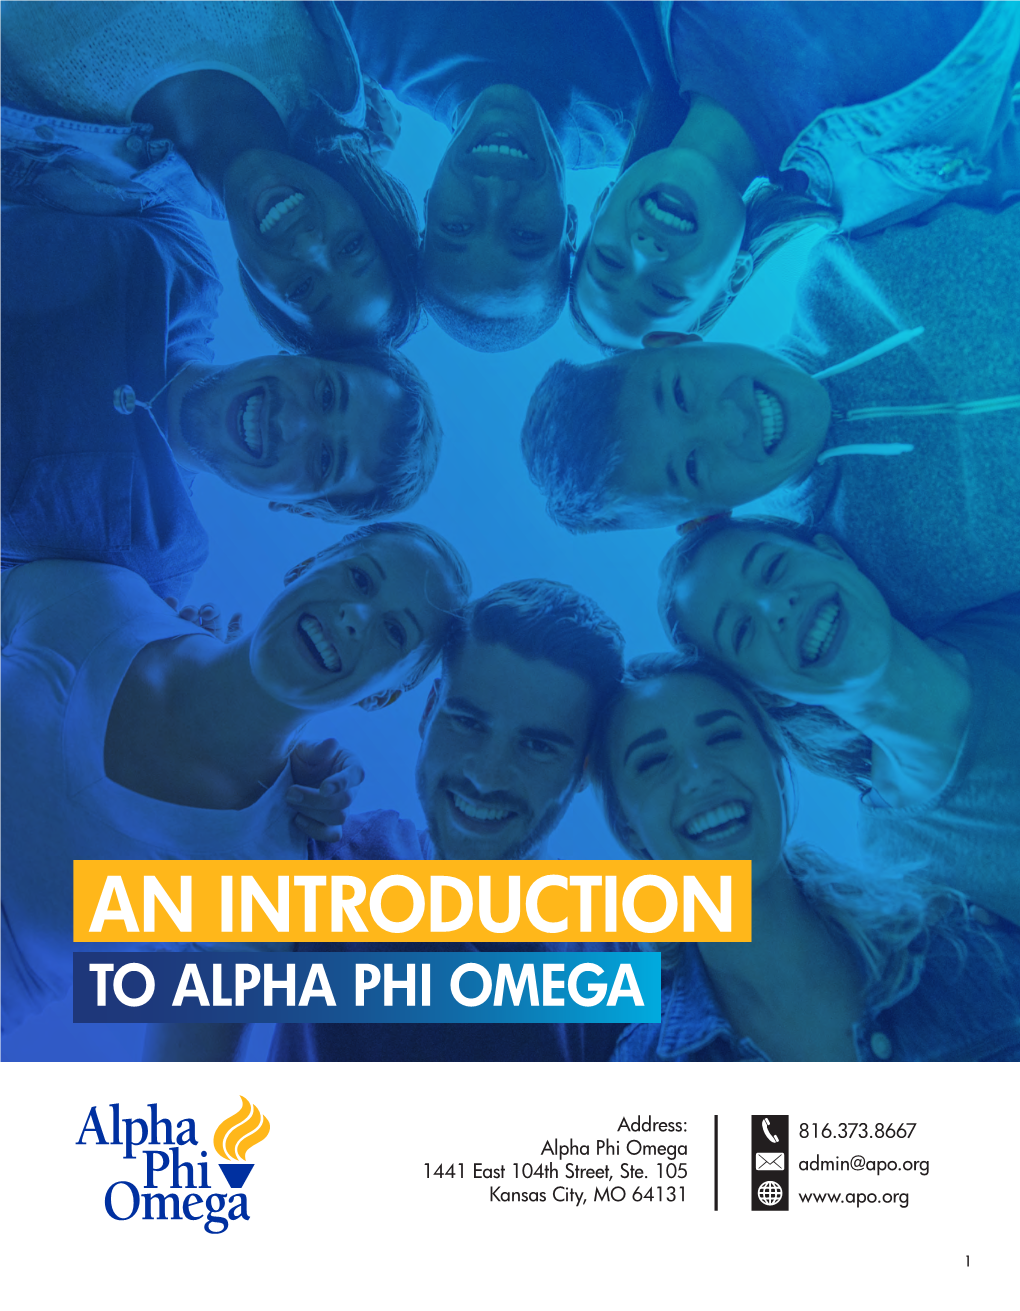 An Introduction to Alpha Phi Omega